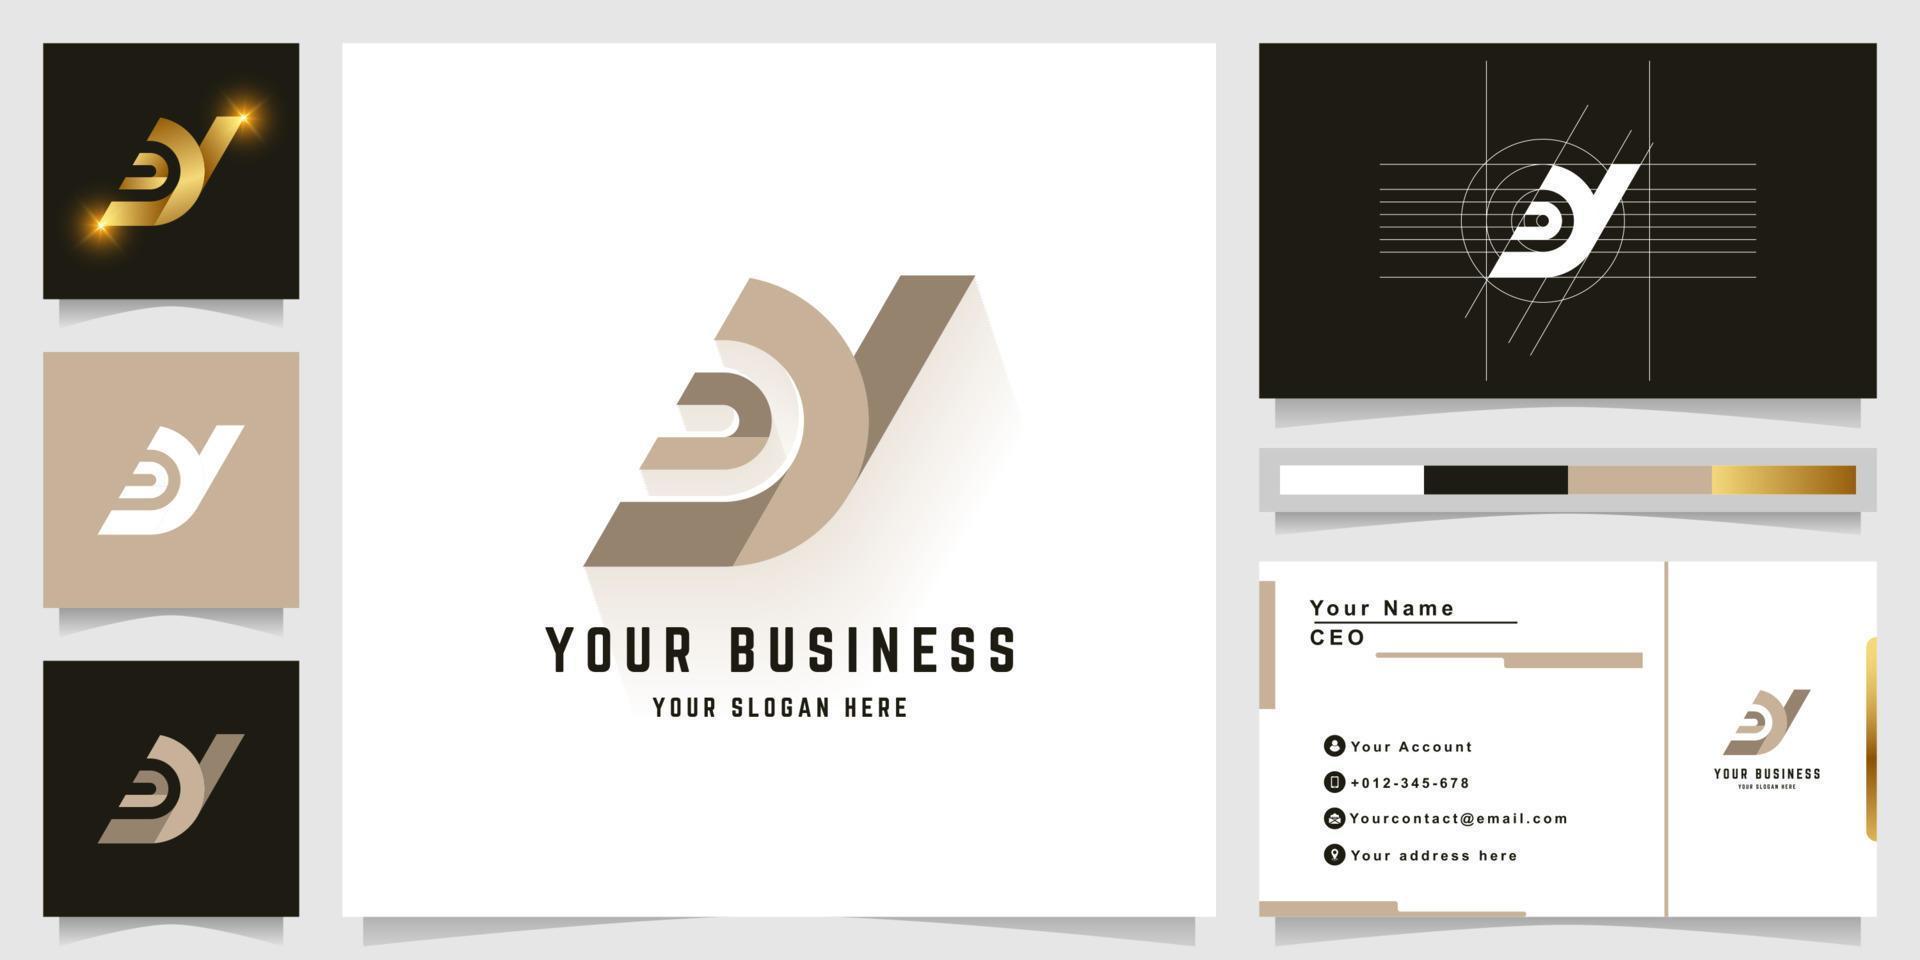 Letter DY or PY monogram logo with business card design vector